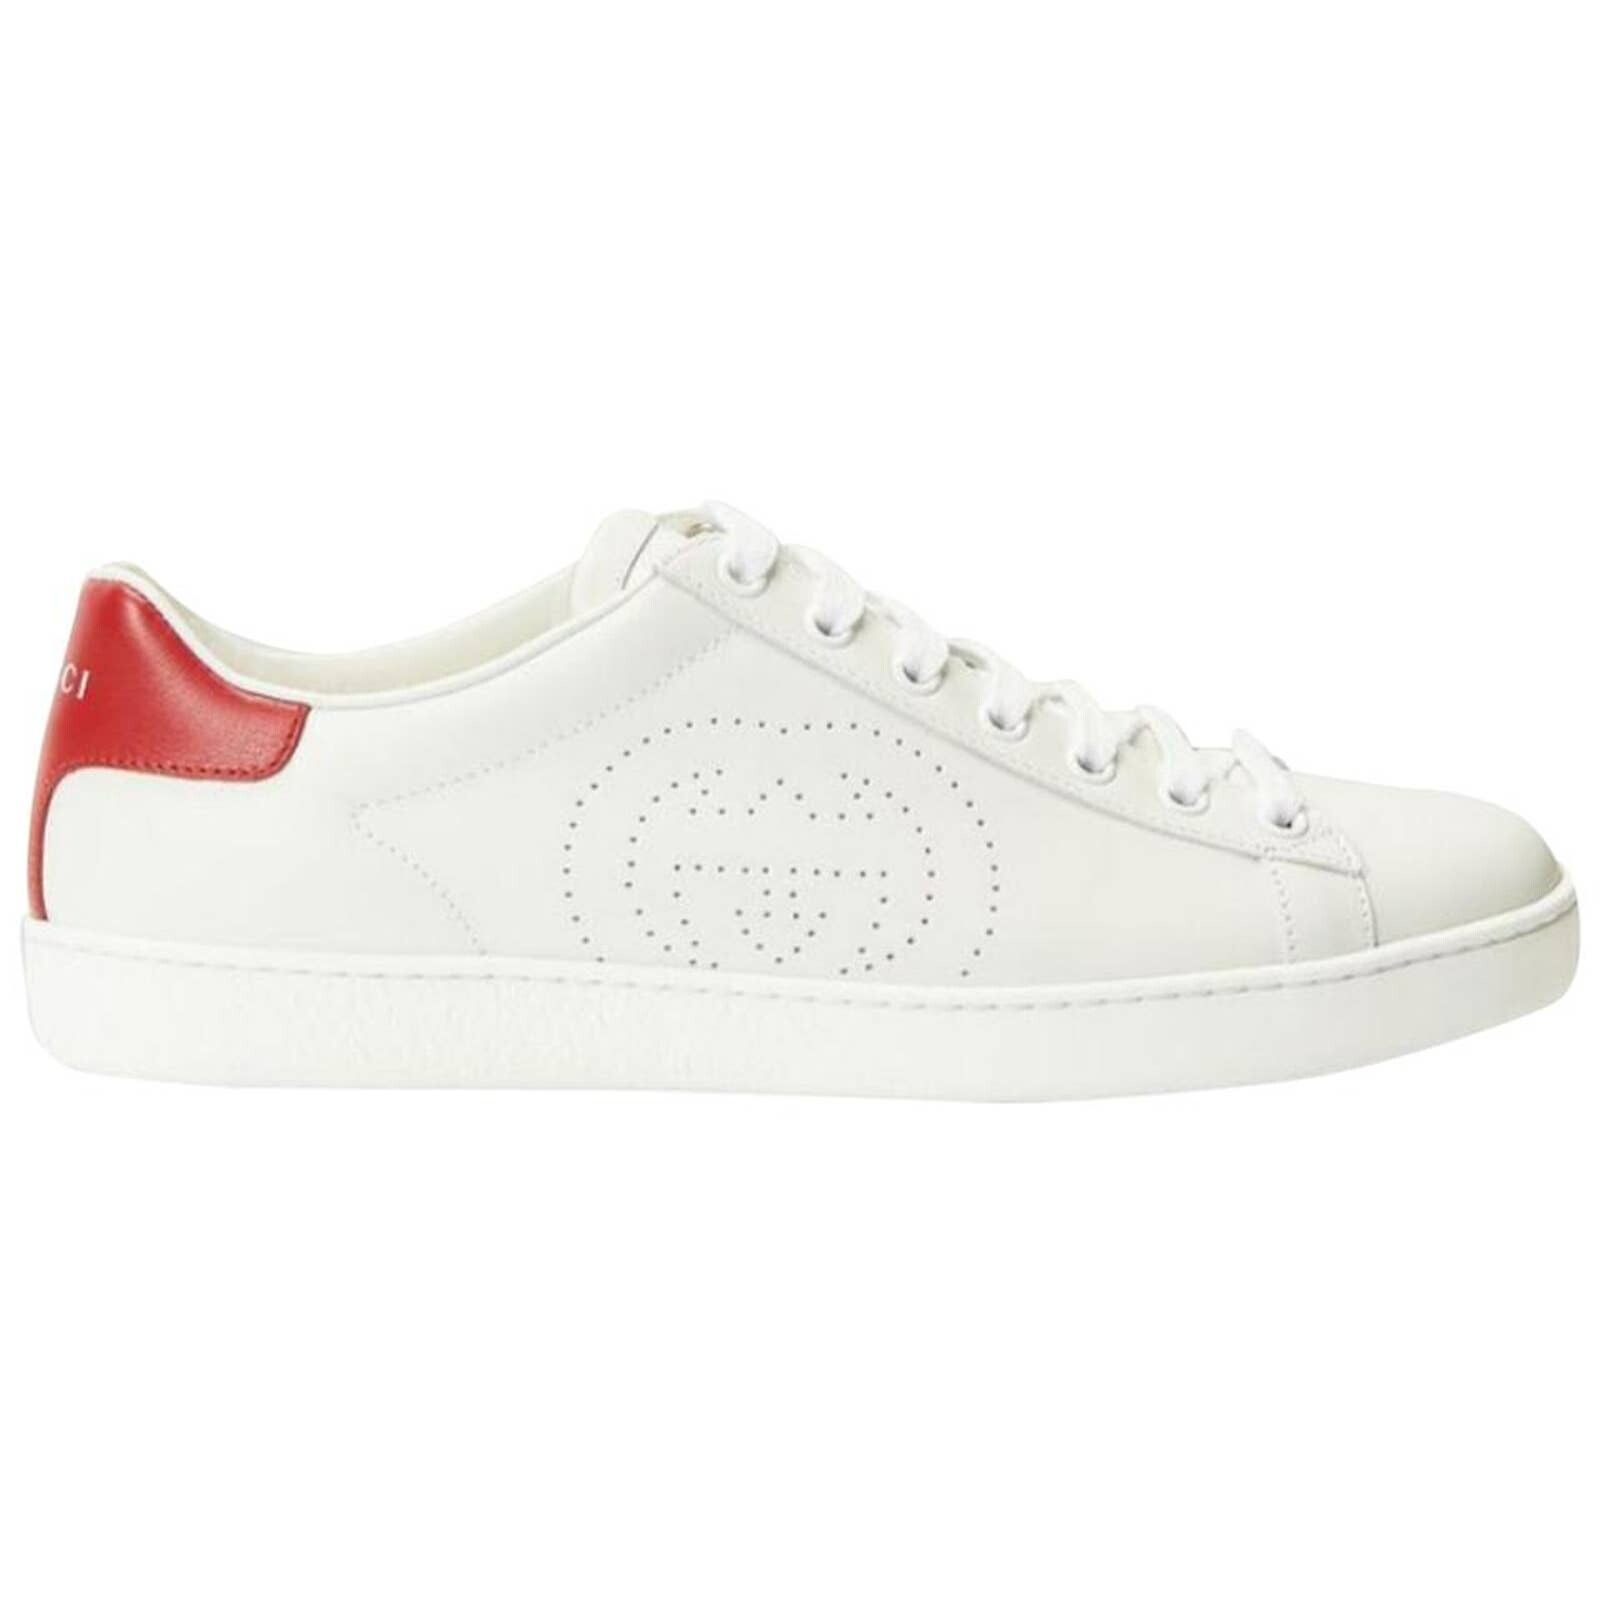 Gucci Ace sneakers with interlocking G logo perforated Size US 6.5 / IT 36.5 - 1 Preview